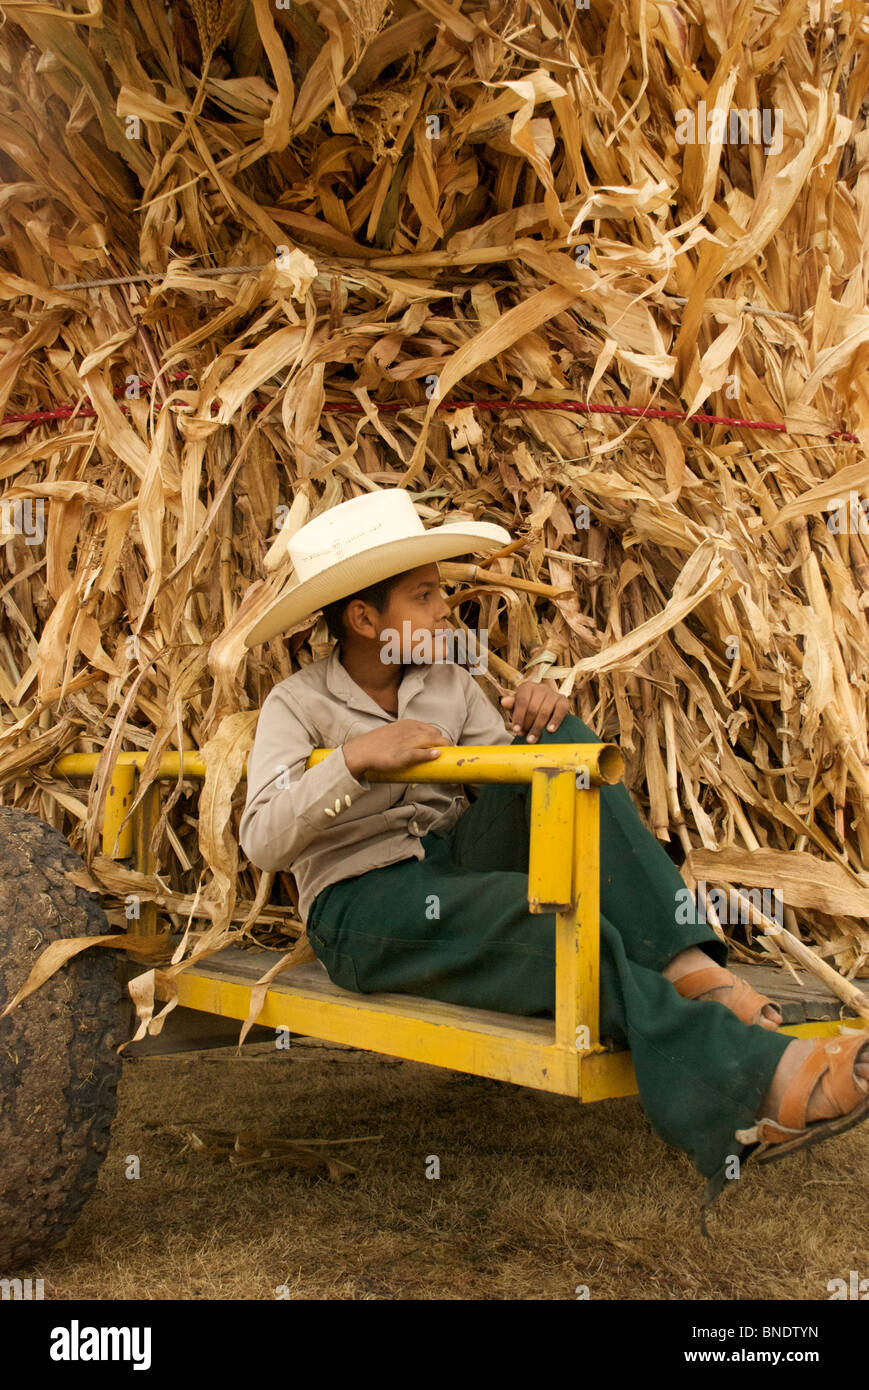 A young farm boy rides the tractor home after bringing in the harvest with his family in rural Mexico. Stock Photo